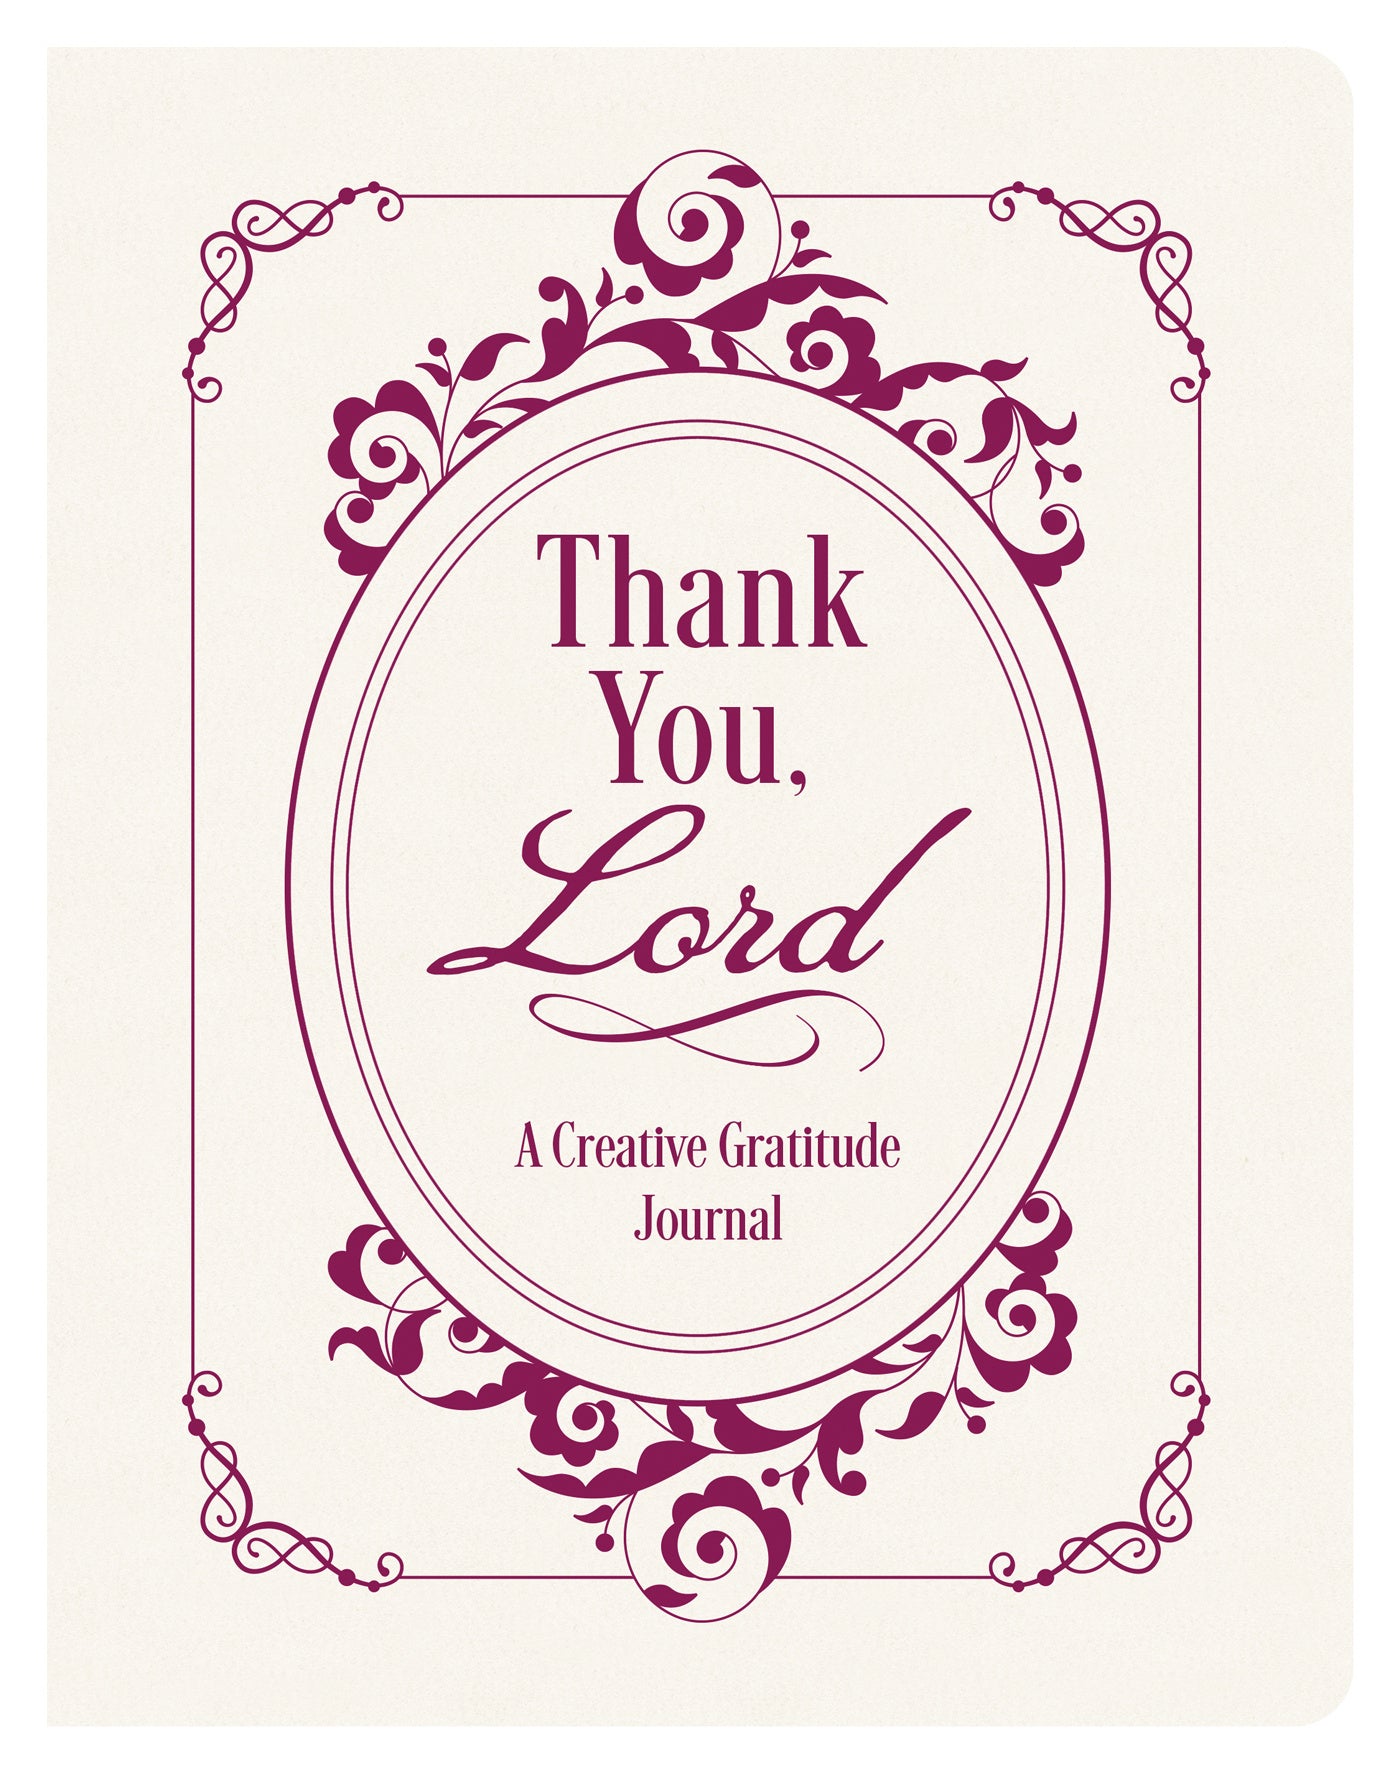 Image of Thank You  Lord: A Creative Gratitude Journal other